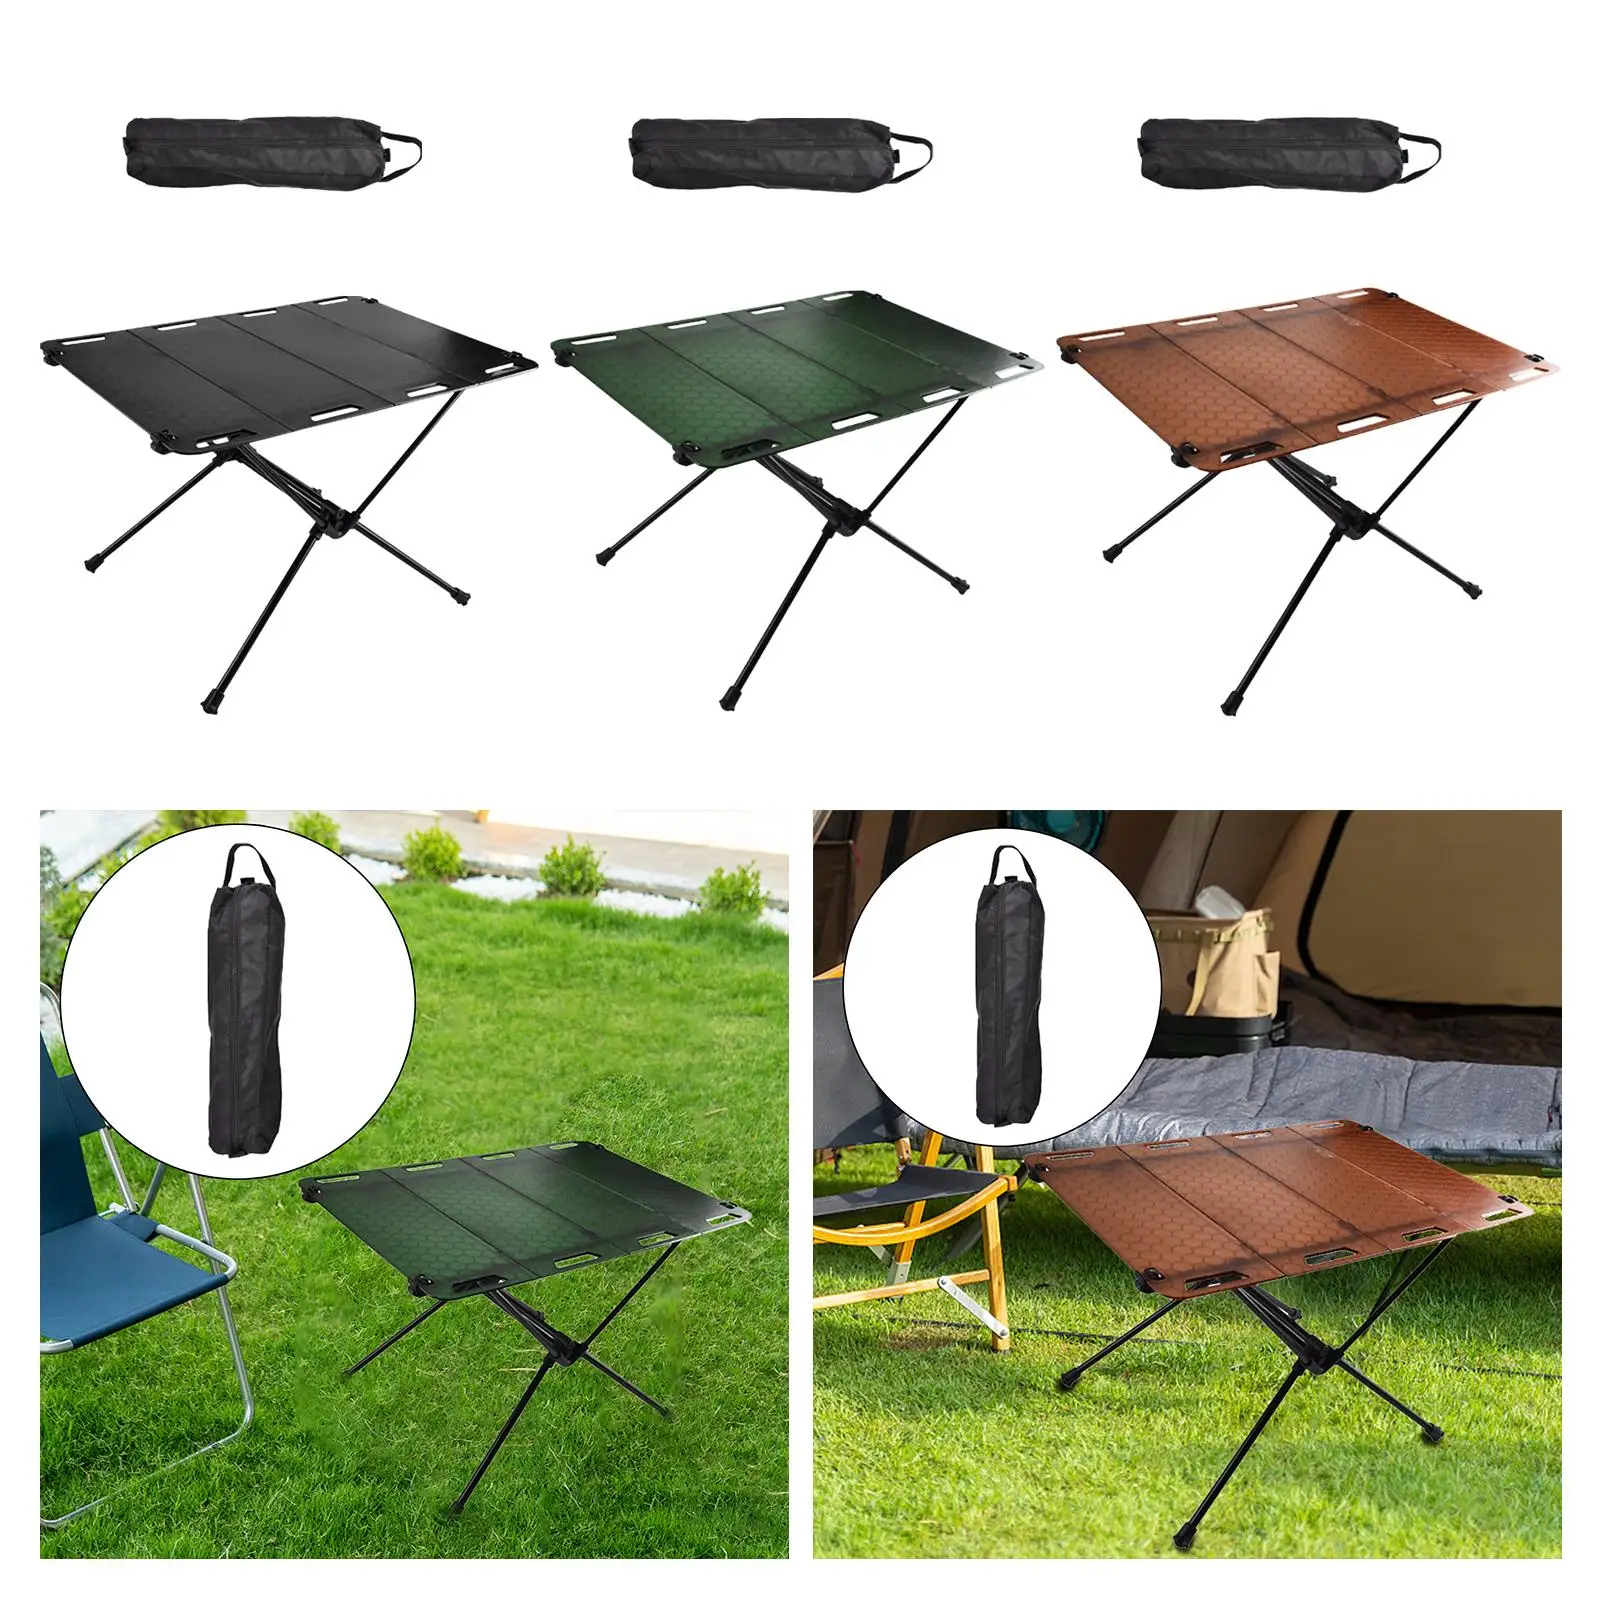 Foldable Camping Table with Storage Bag Outdoor Foldable Table Beach Table for